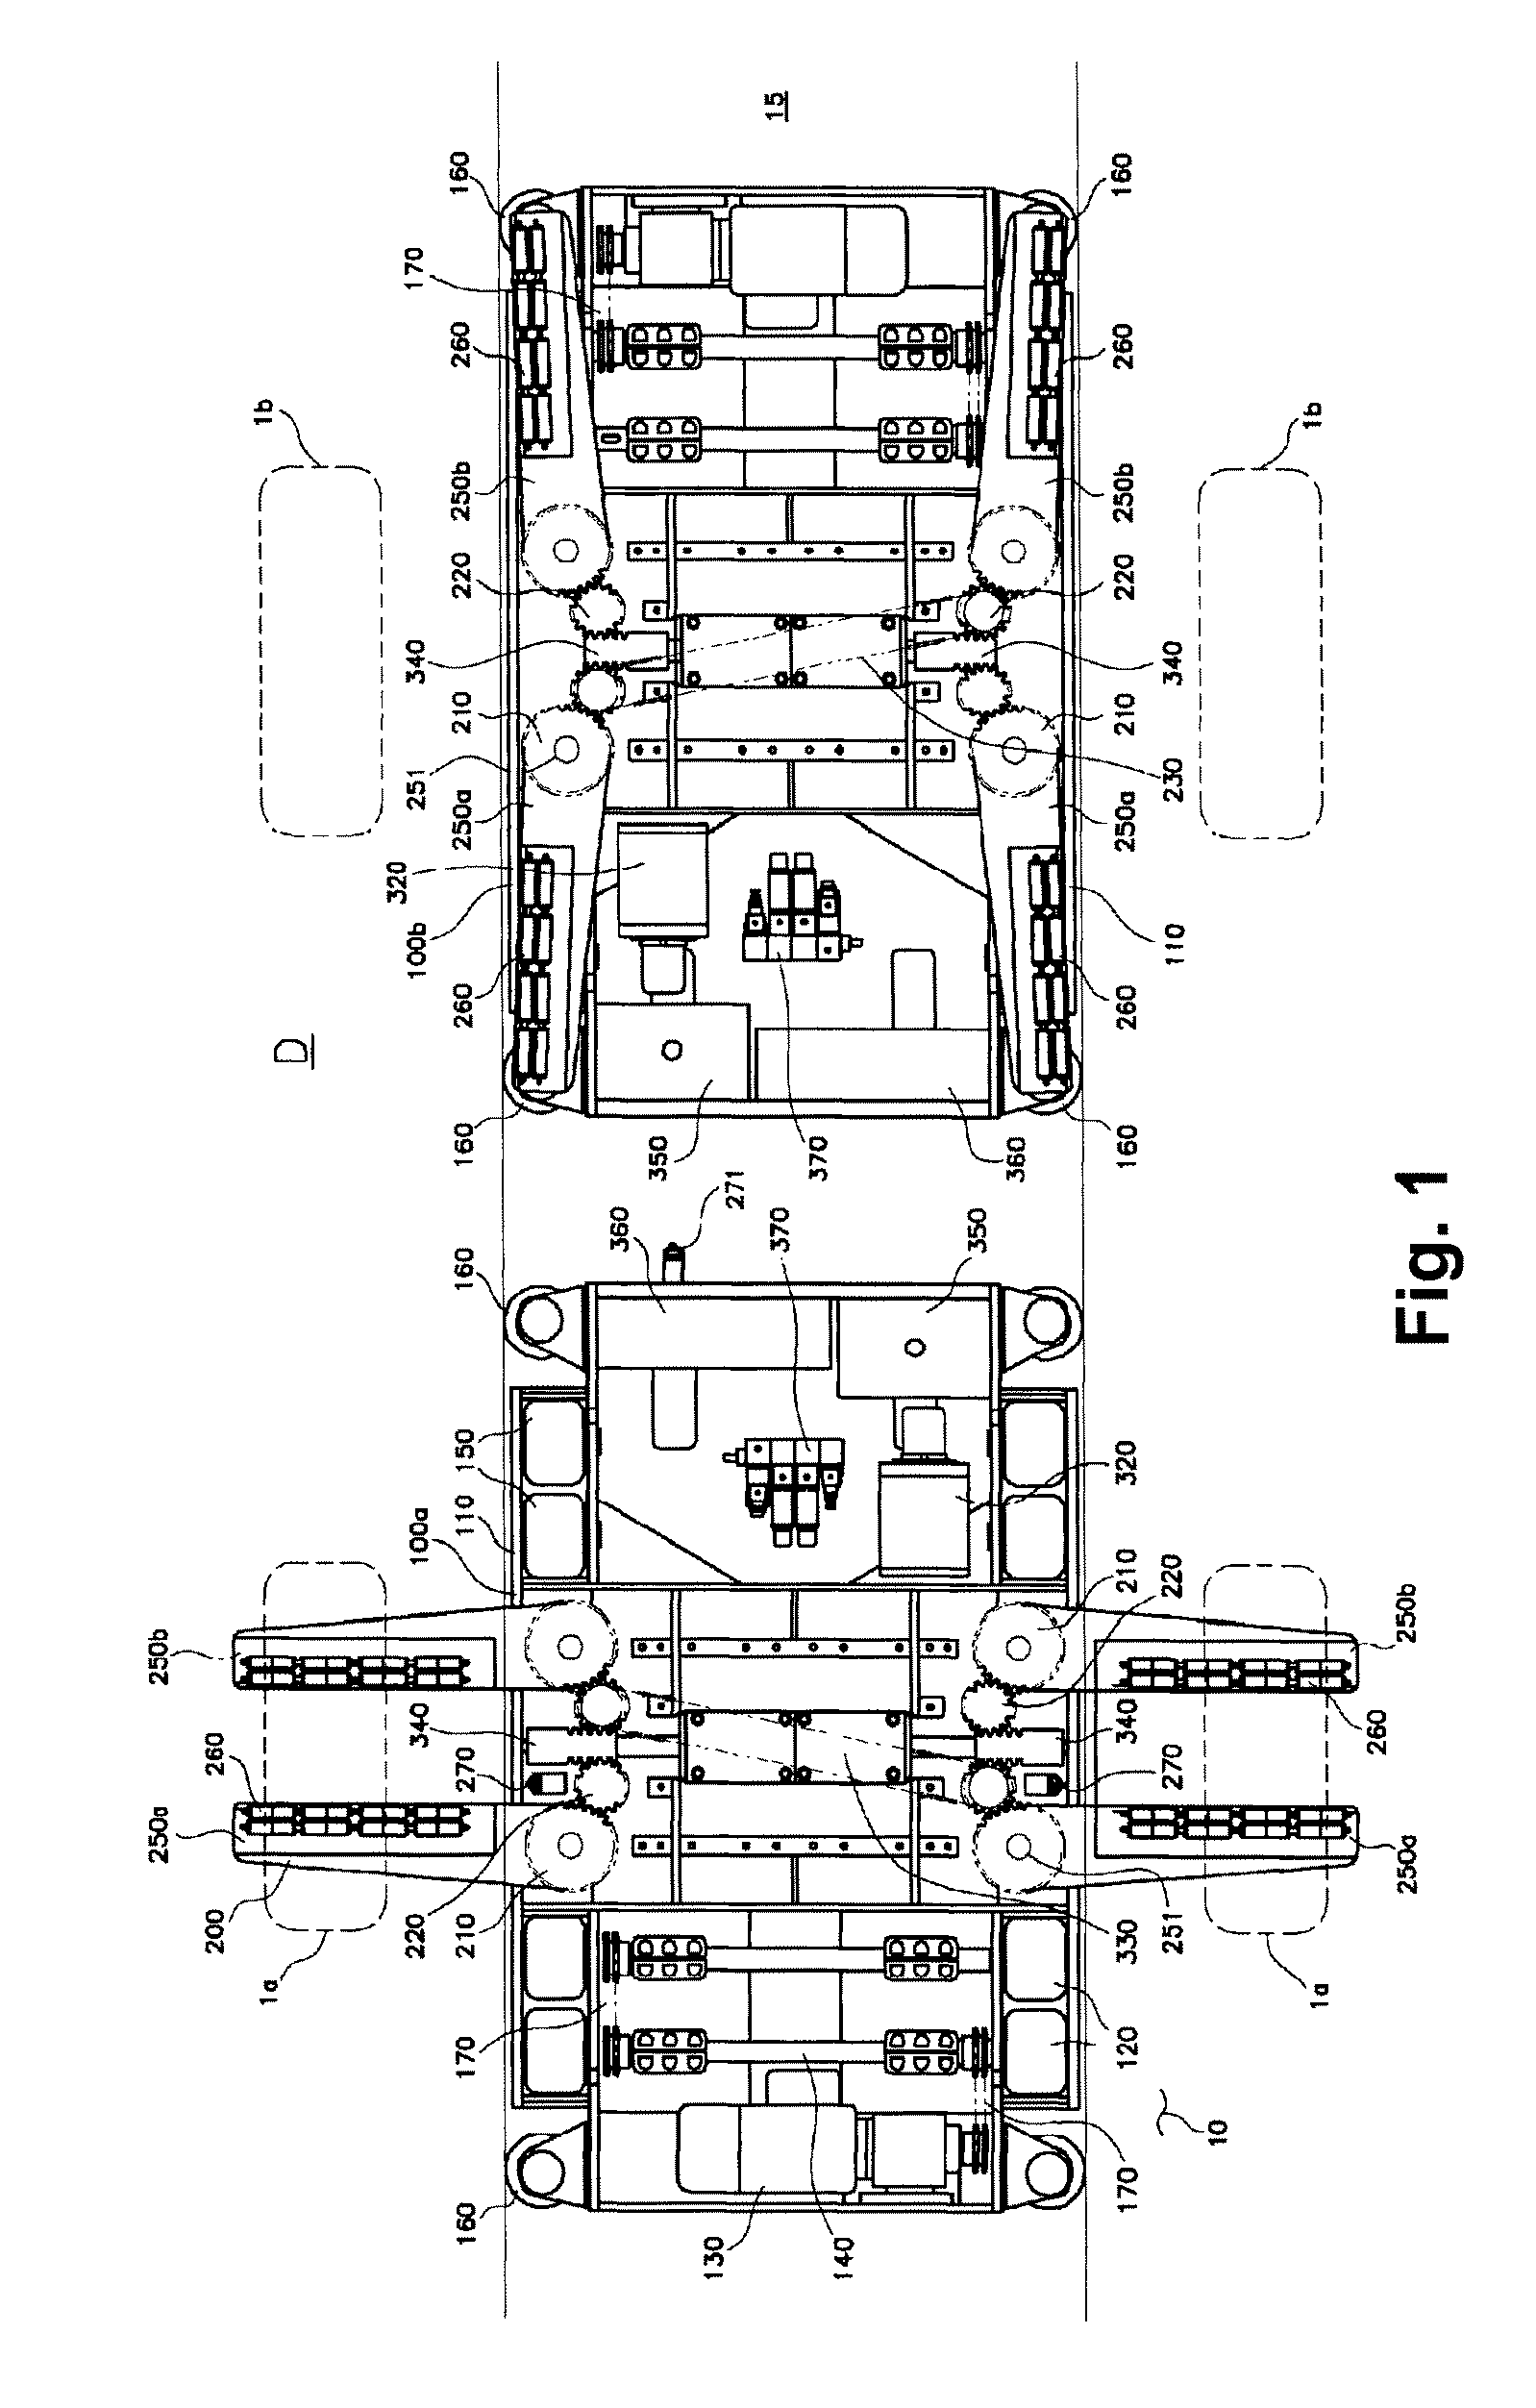 Apparatus for transporting a motor vehicle in a parking system